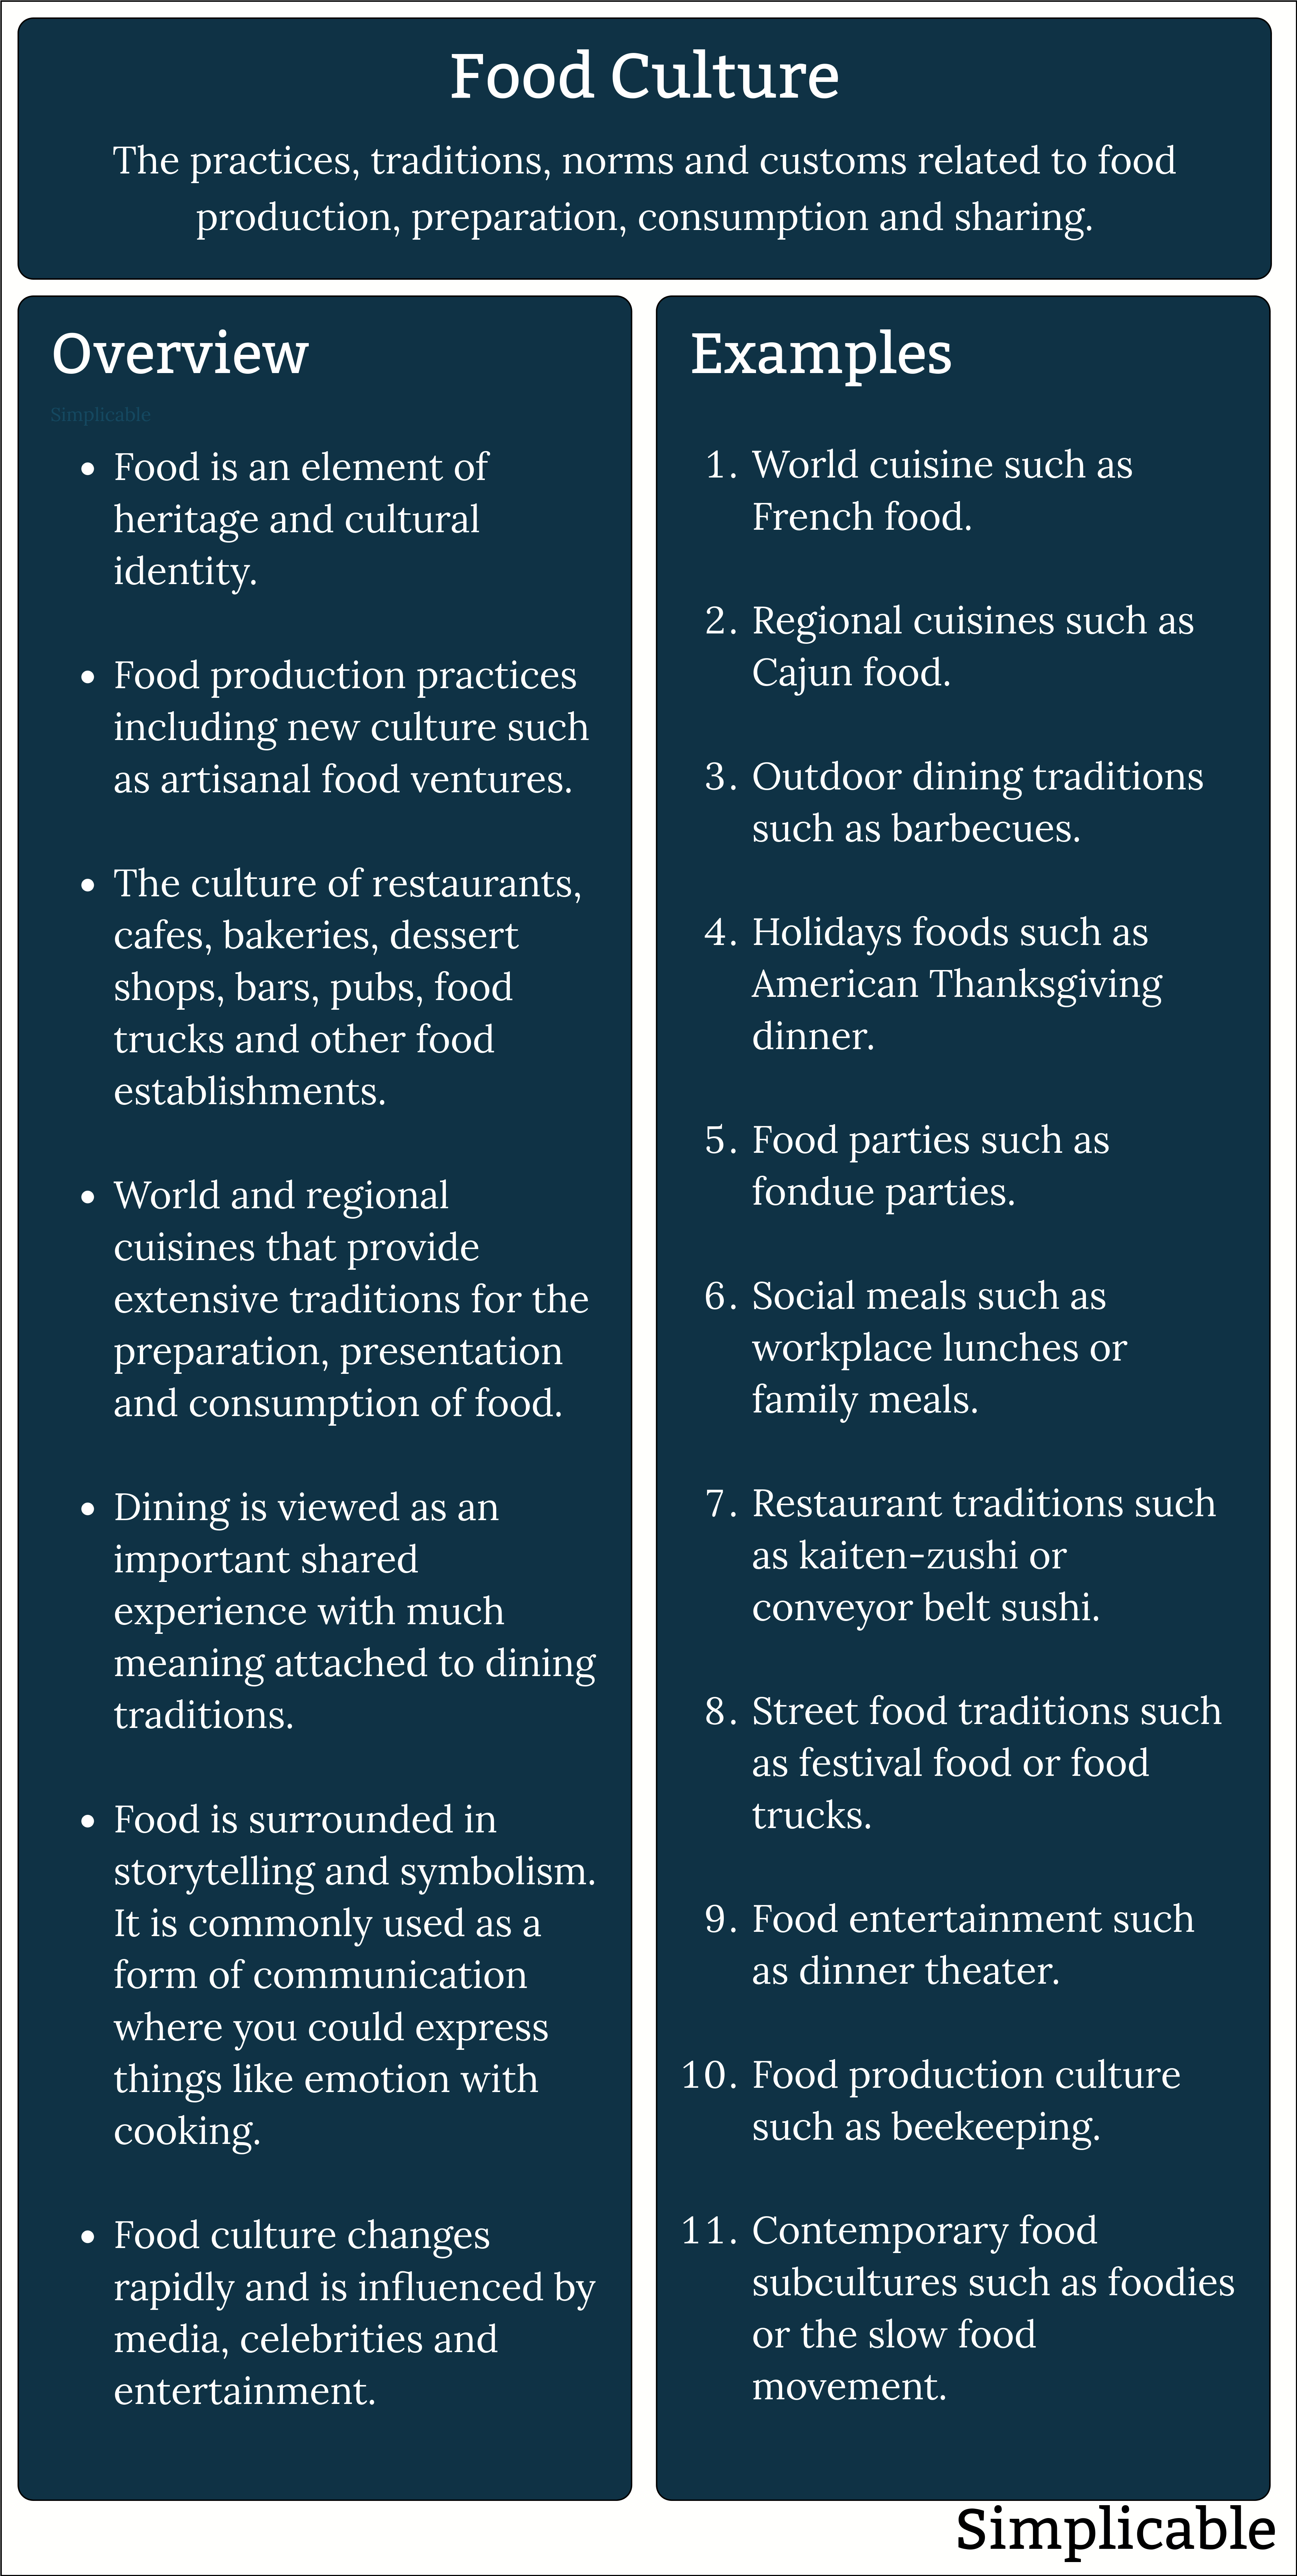 food culture overview and examples